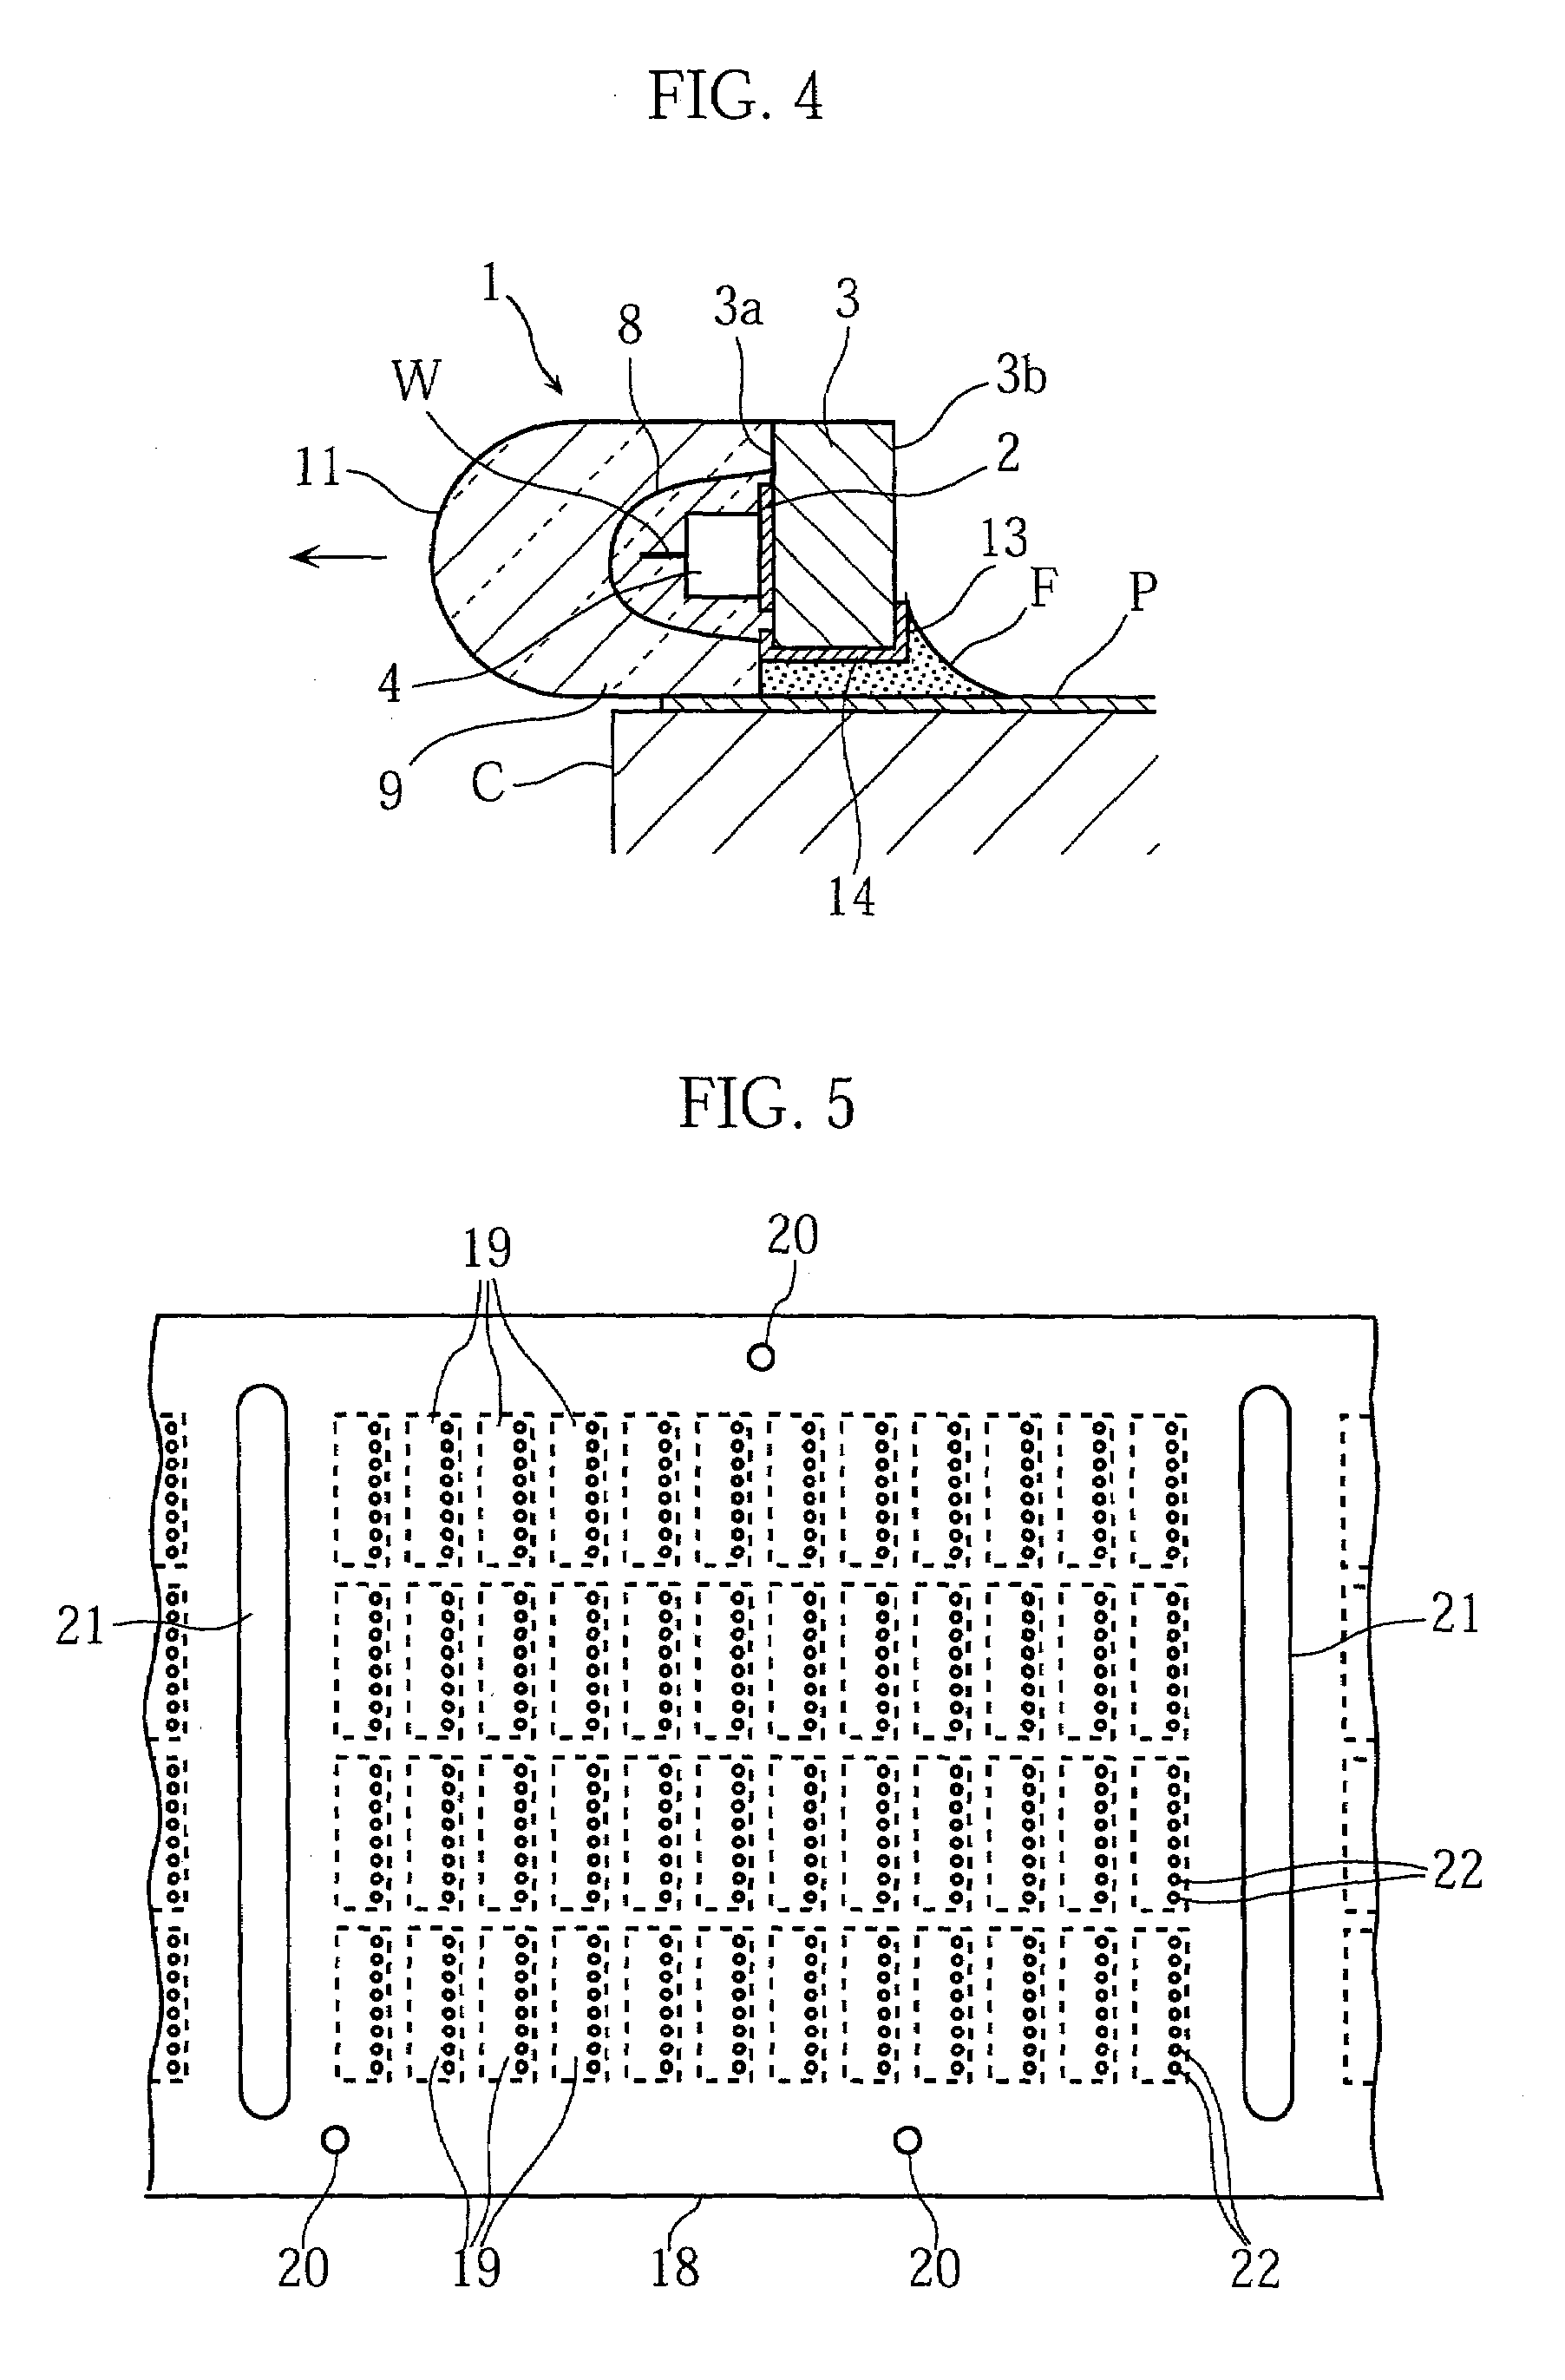 Infrared data communication module and method of making the same